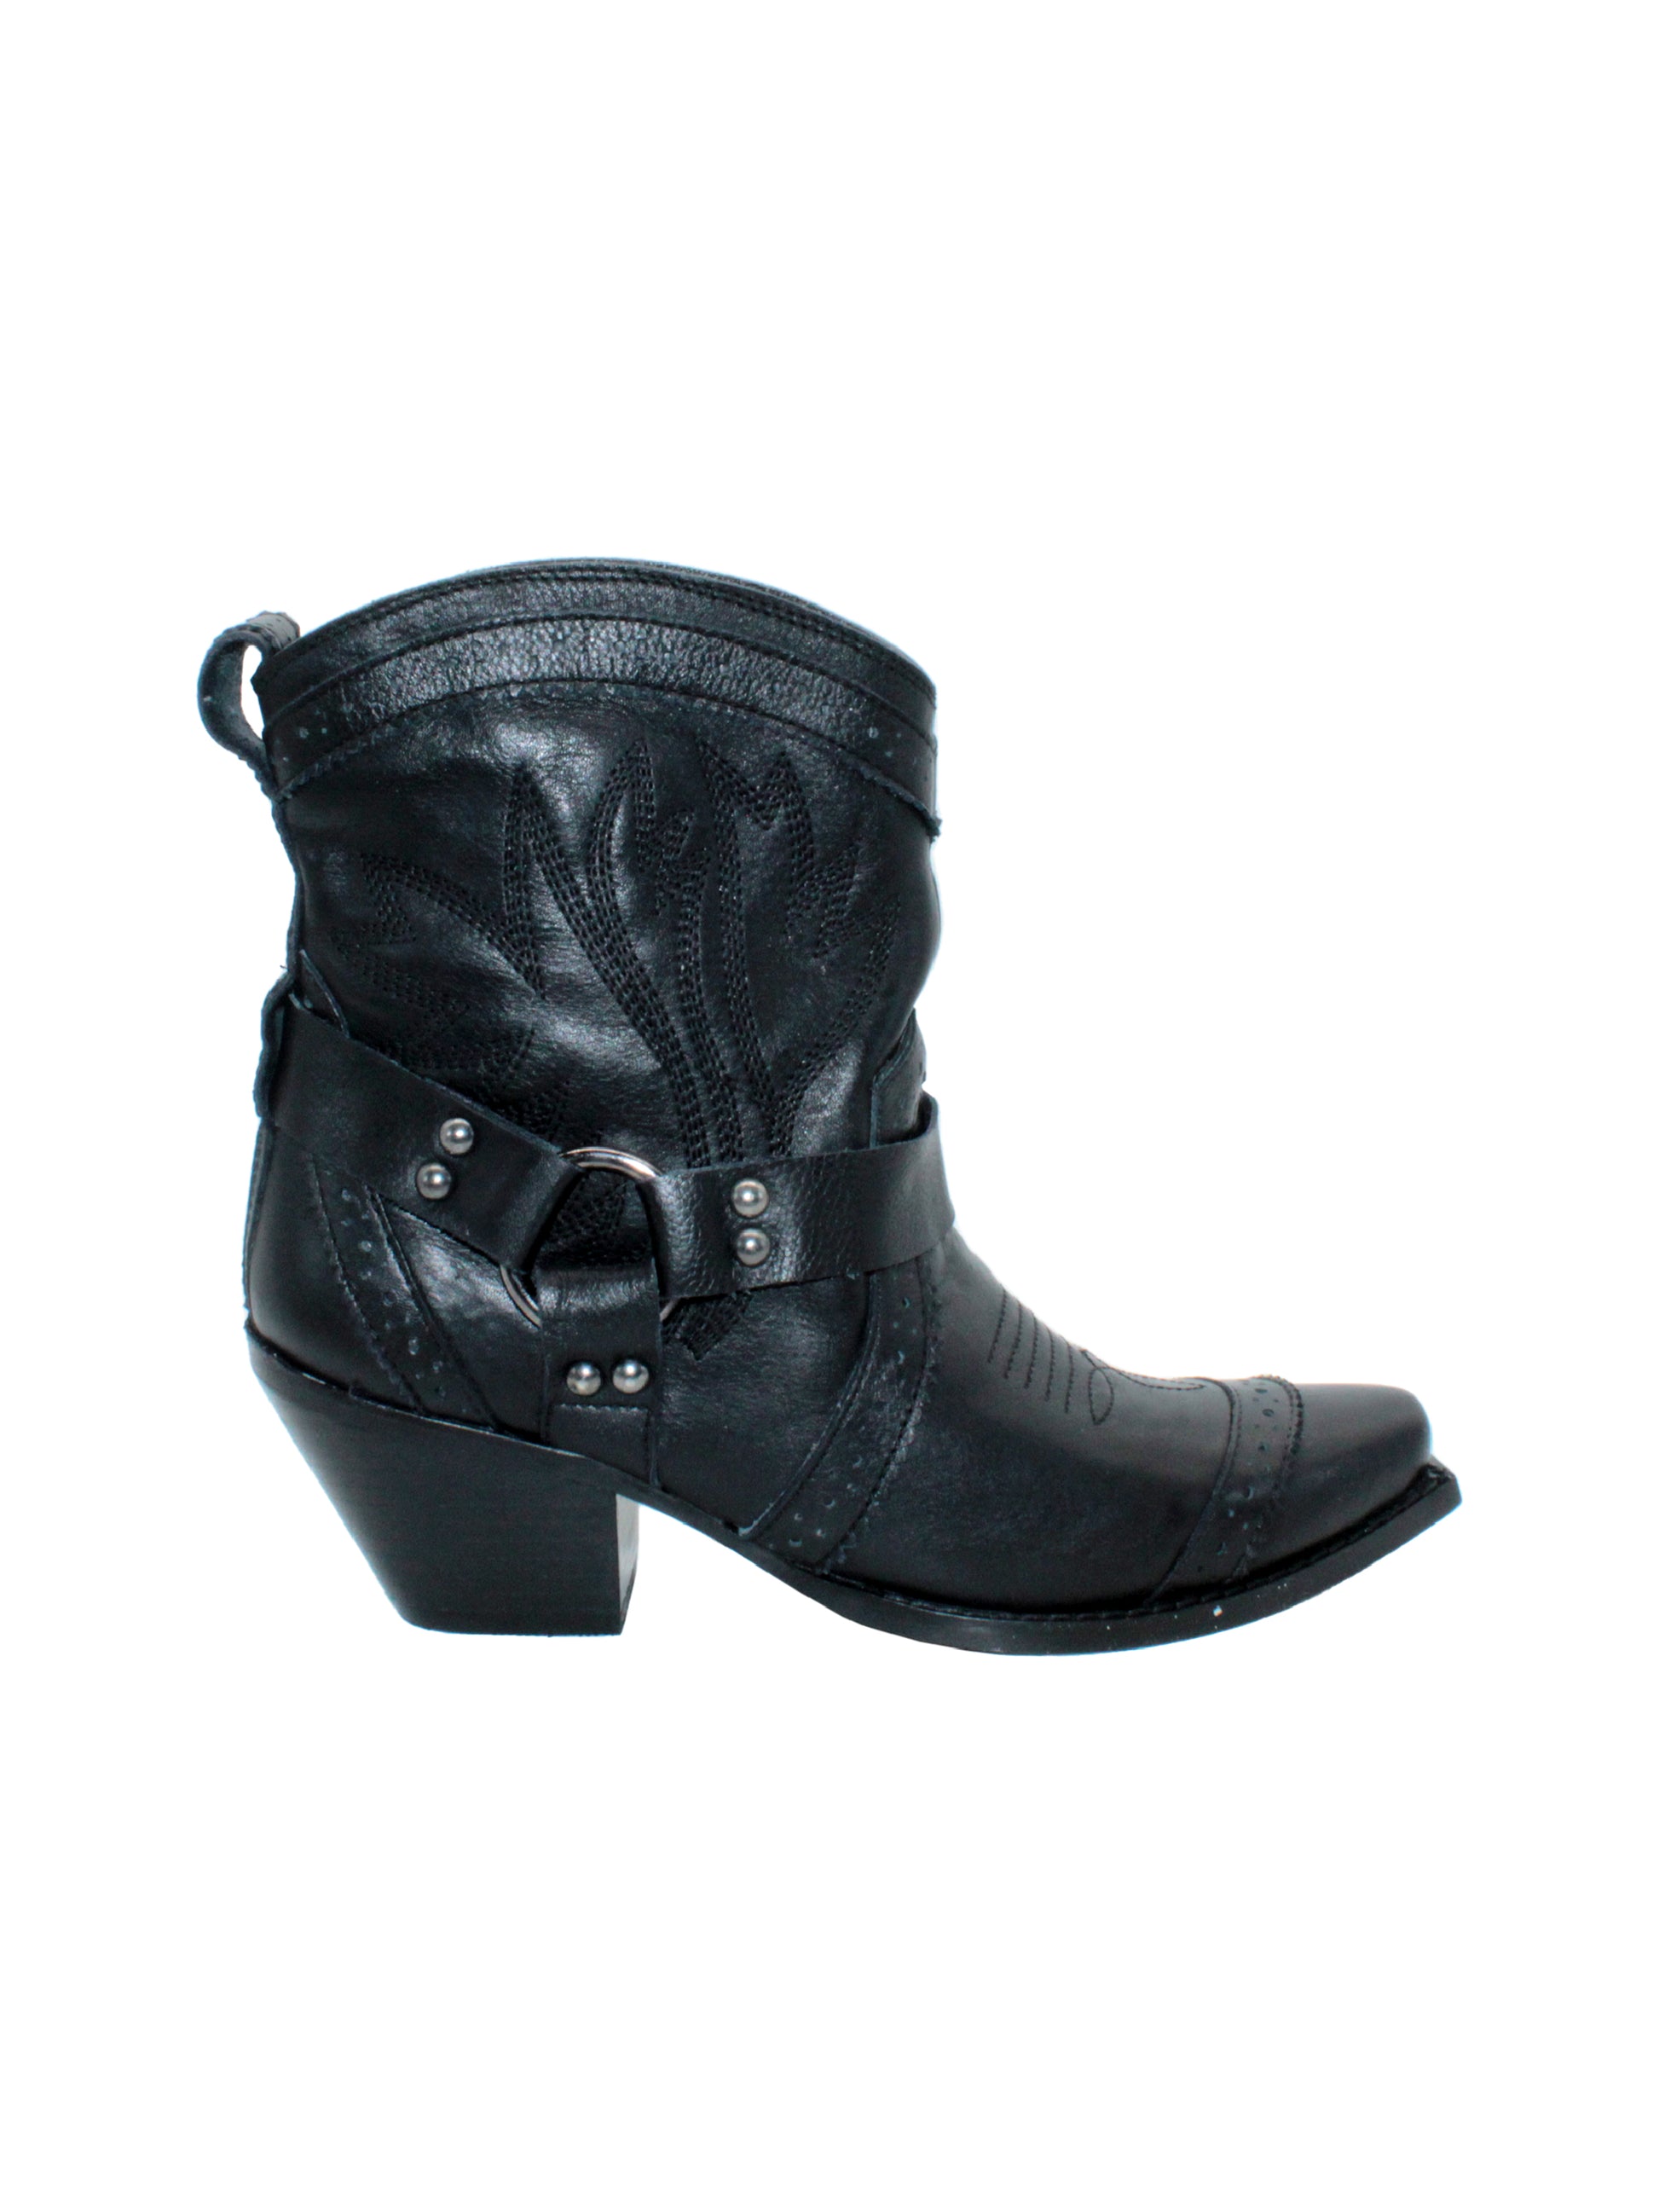 Very Volatile’s ‘Cascade’ bootie hits all the notes for a quintessential western boot. Featuring hardness style straps with metal hardware, subtle western embroidery, and perforated overlays with pinked edges. Kick up your heels with these booties in your favorite jeans or fall maxi dress.